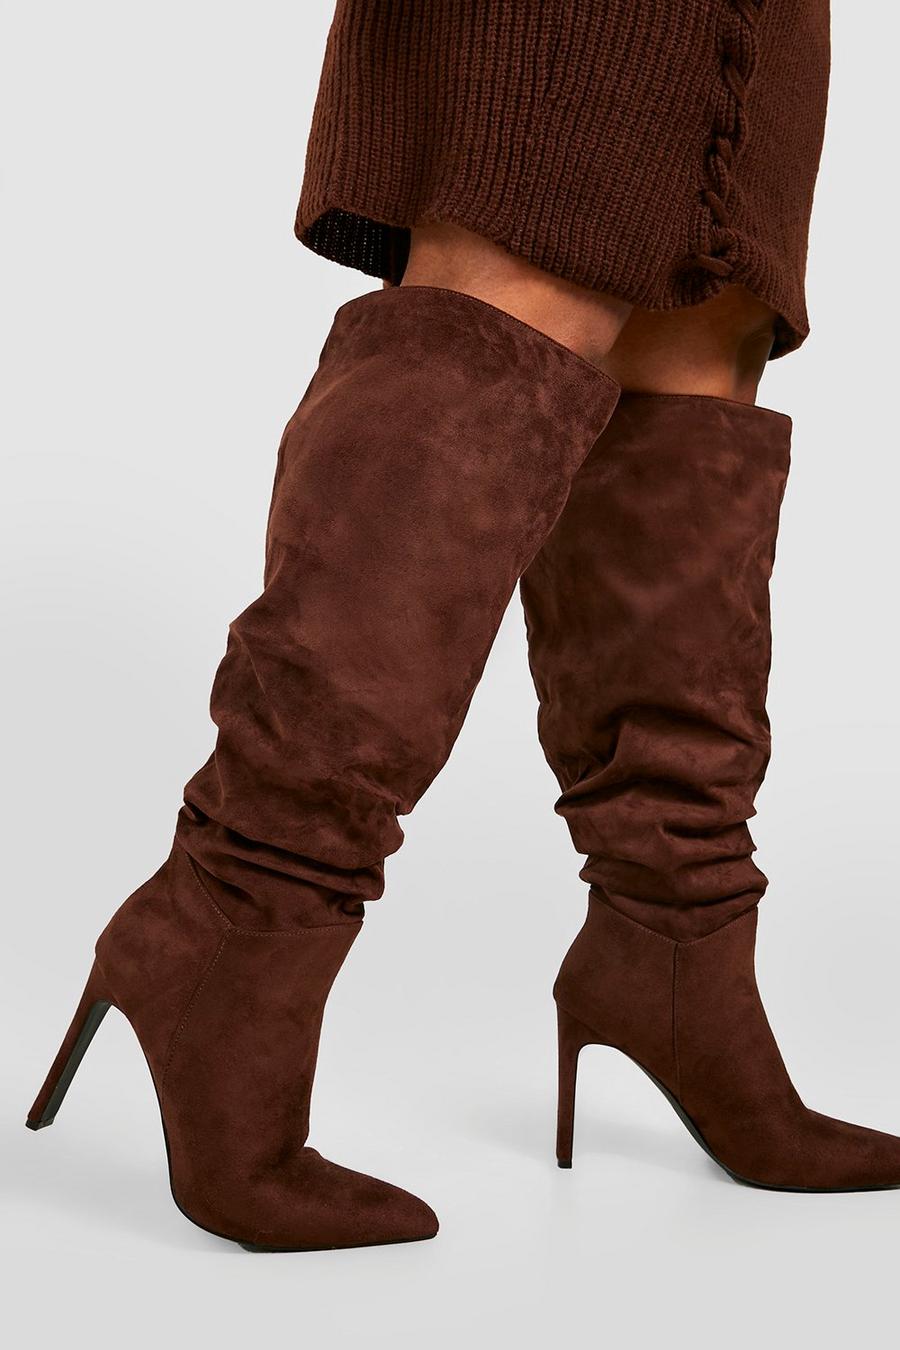 Chocolate brown Wider Calf Ruched Detail Knee High Boots